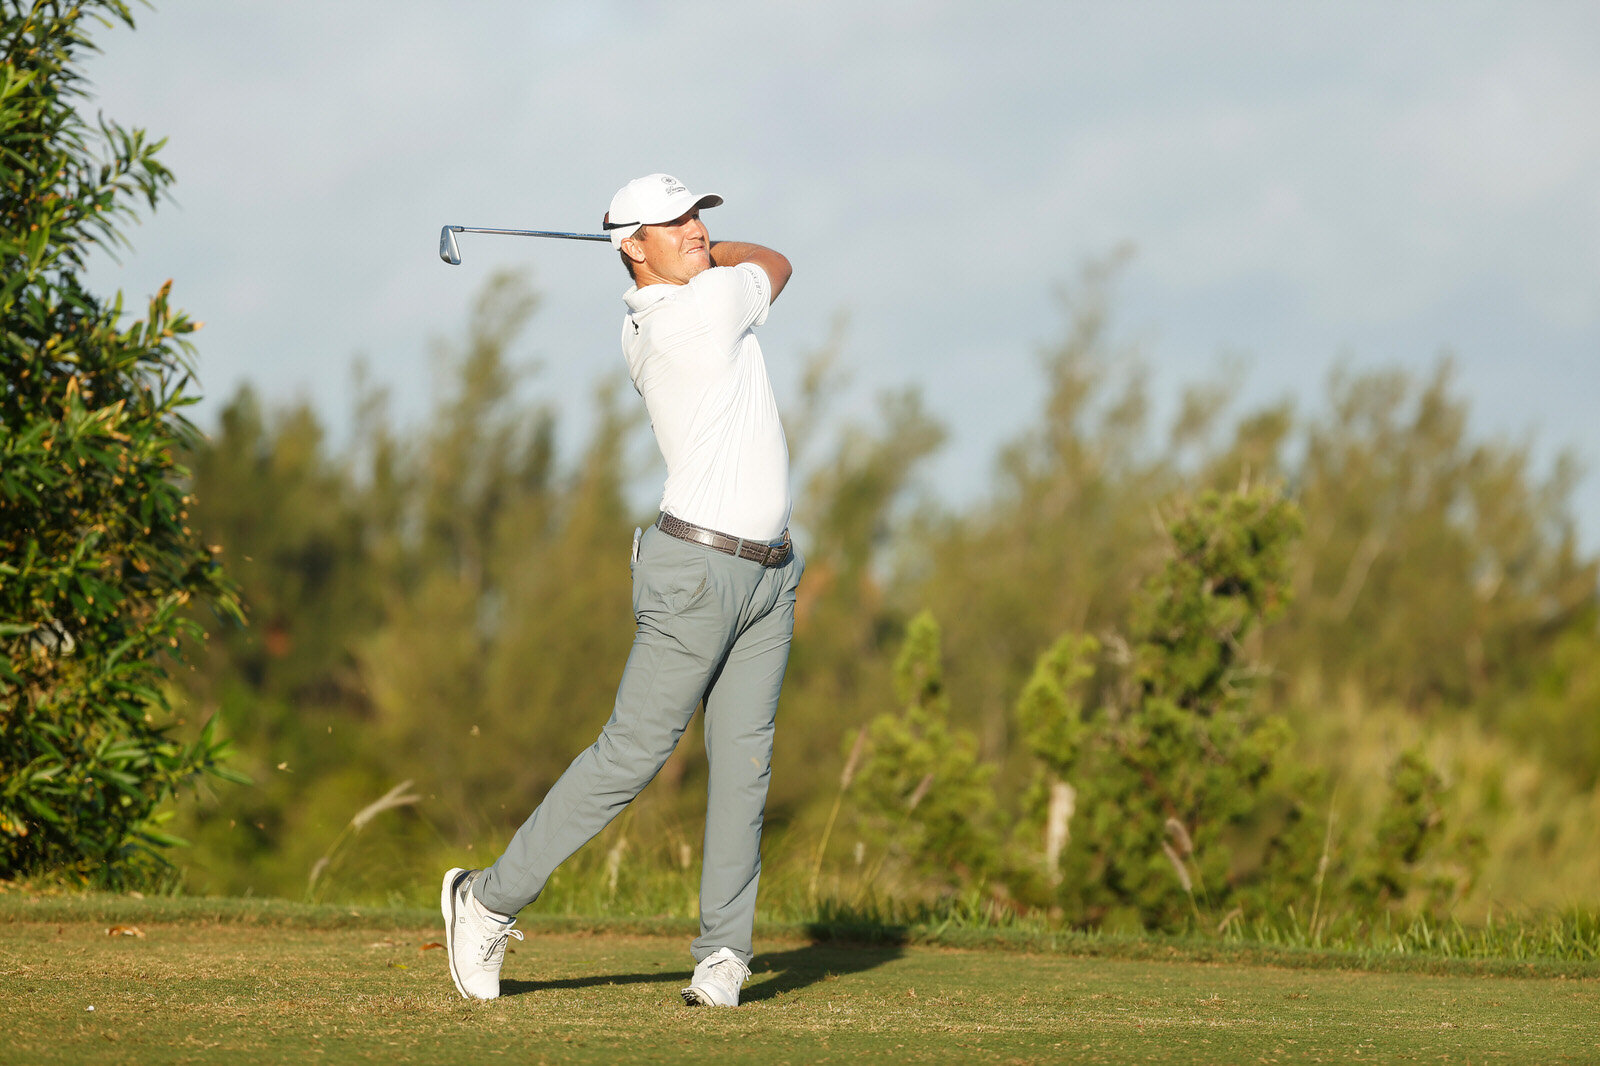  SOUTHAMPTON, BERMUDA - OCTOBER 30: Kramer Hickok plays his shot from the first tee during the second round of the Bermuda Championship at Port Royal Golf Course on October 30, 2020 in Southampton, Bermuda. (Photo by Gregory Shamus/Getty Images) 